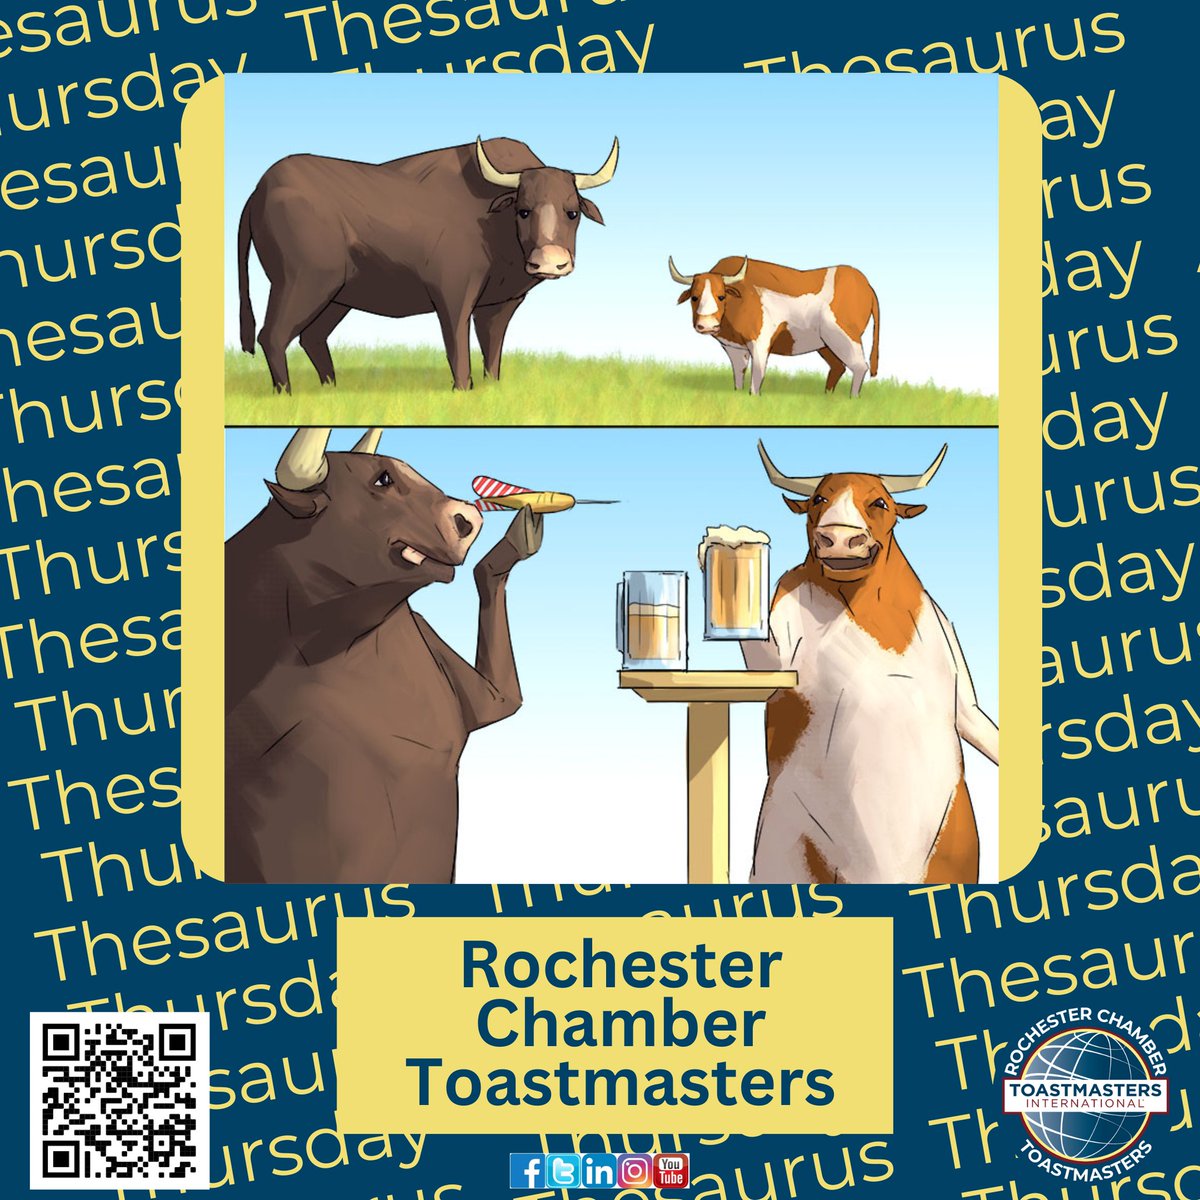 Thesaurus Thursday - Just like good cows, great #Toastmasters meetings are “Convivial” (def) friendly; agreeable; genial, companionable, sociable #rochmn  #mn #rochester_mn  #minnesotas_rochester #publicspeaking  #neighborshare #neighborstory #wordofday #convivial